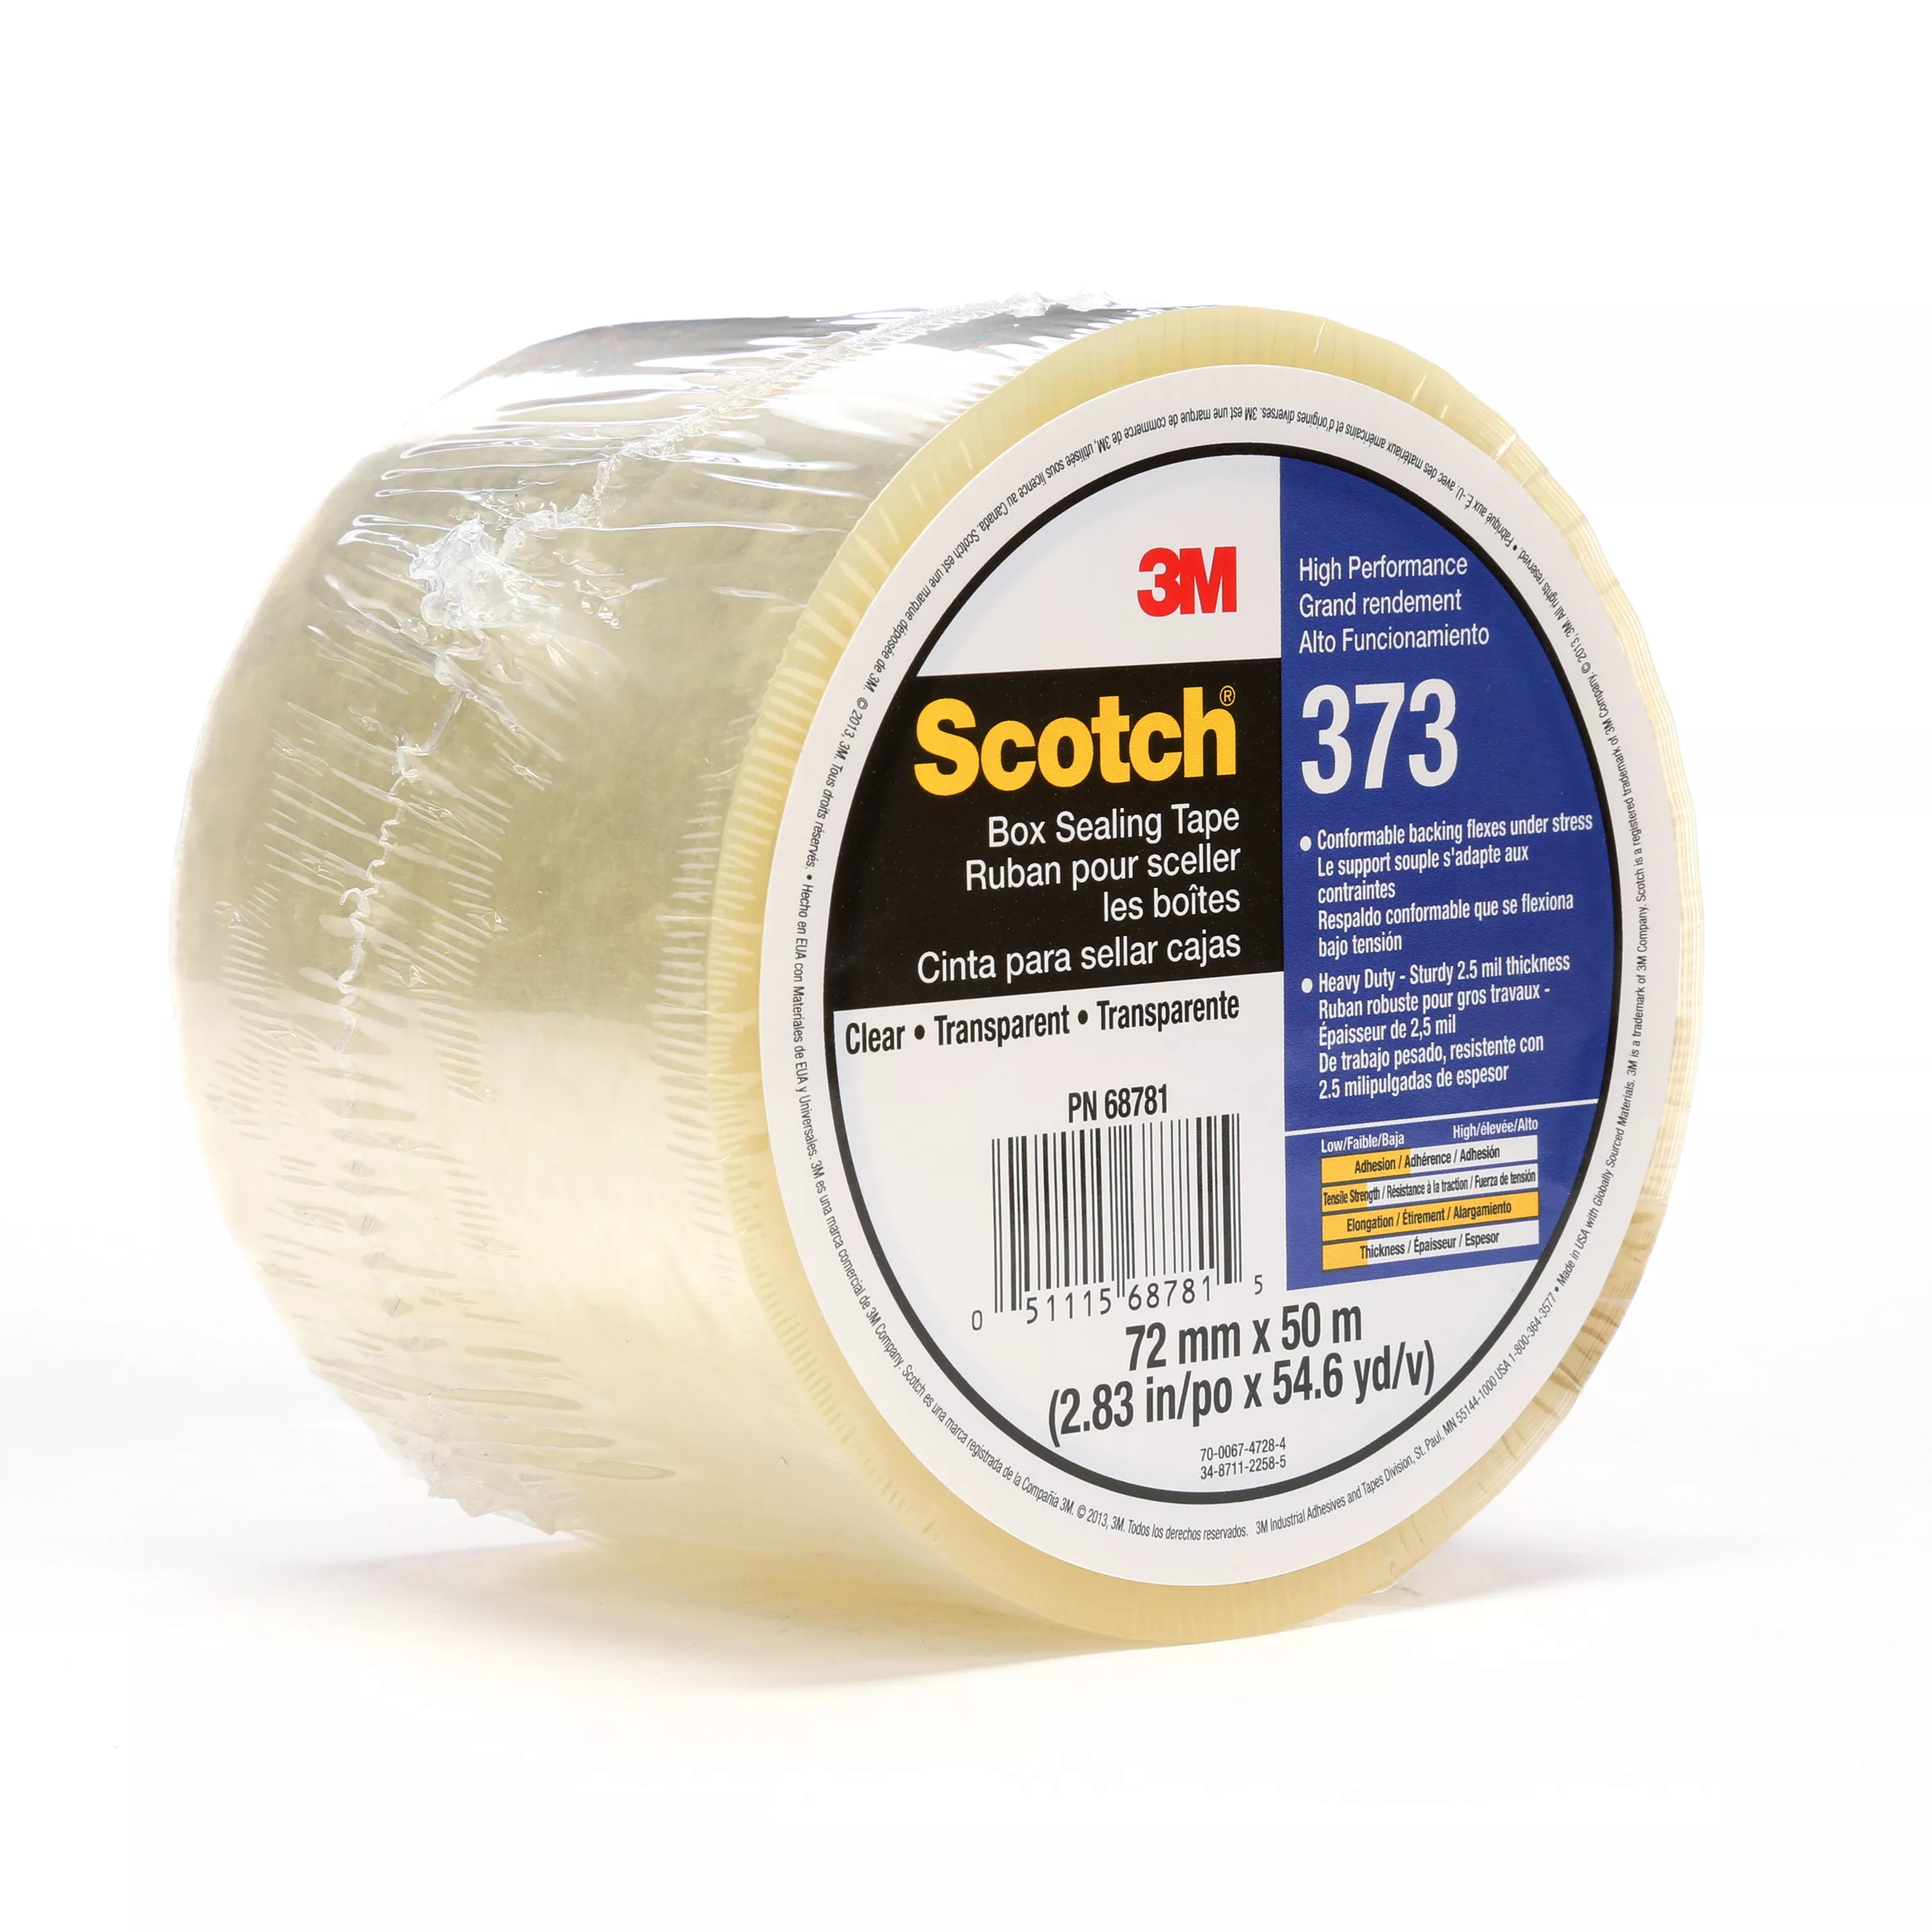 Scotch® Box Sealing Tape 373, Clear, 72mm x 50m, 24/Case, Individually
Wrapped Conveniently Packaged